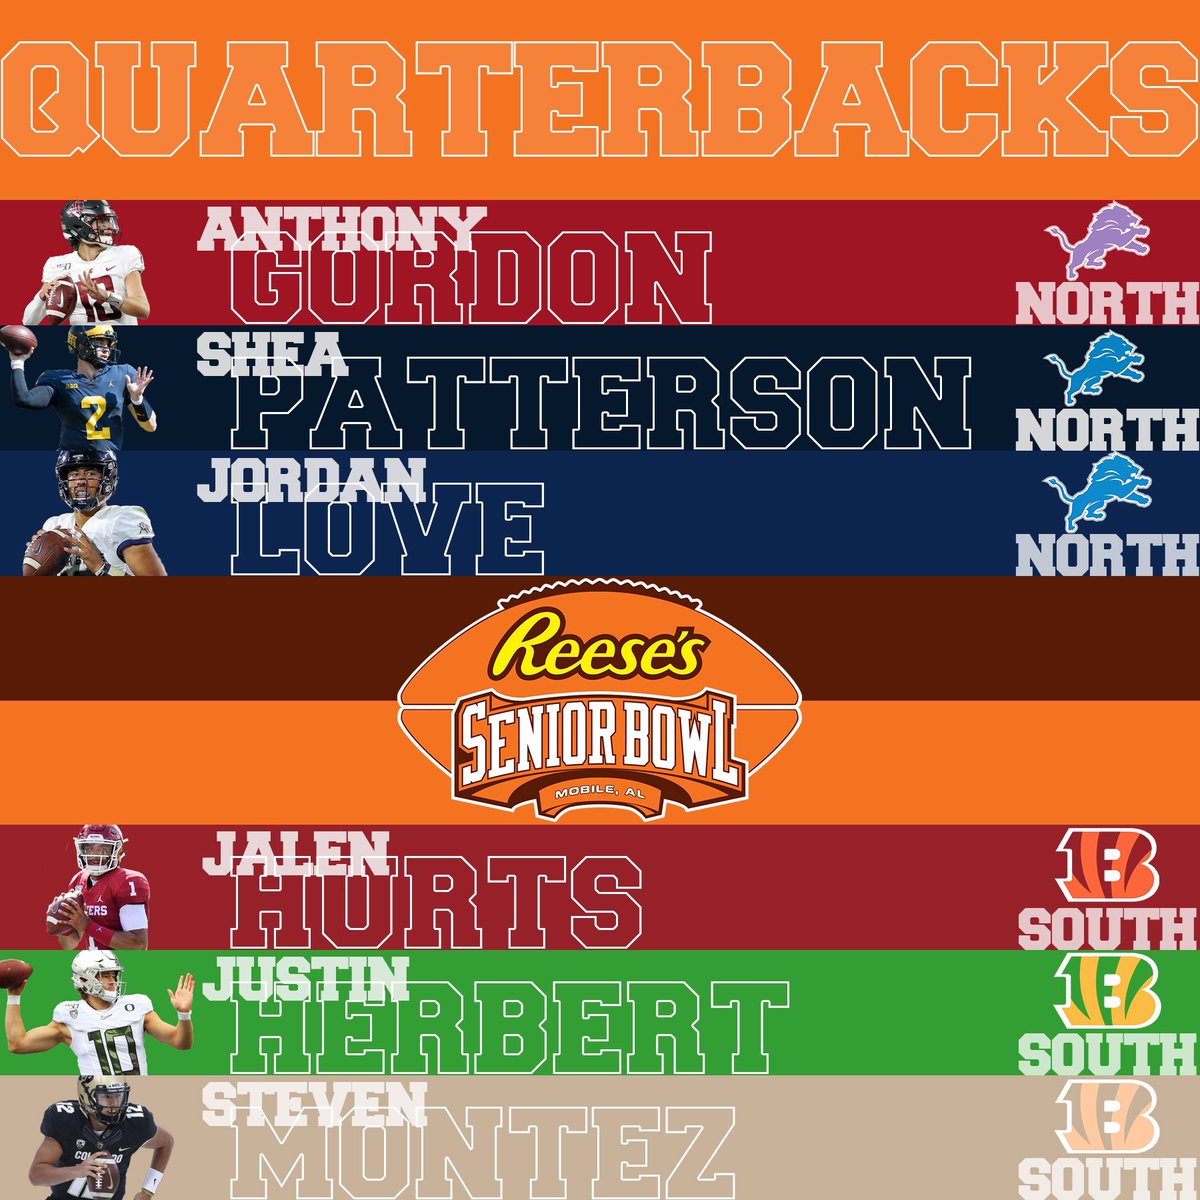 🚨BREAKING NEWS: The #Bengals will coach the South roster and the #Lions will coach the North at this year’s Reese’s Senior Bowl. First position group released for 2020 @seniorbowl is QBs... #TheDraftStartsInMOBILE